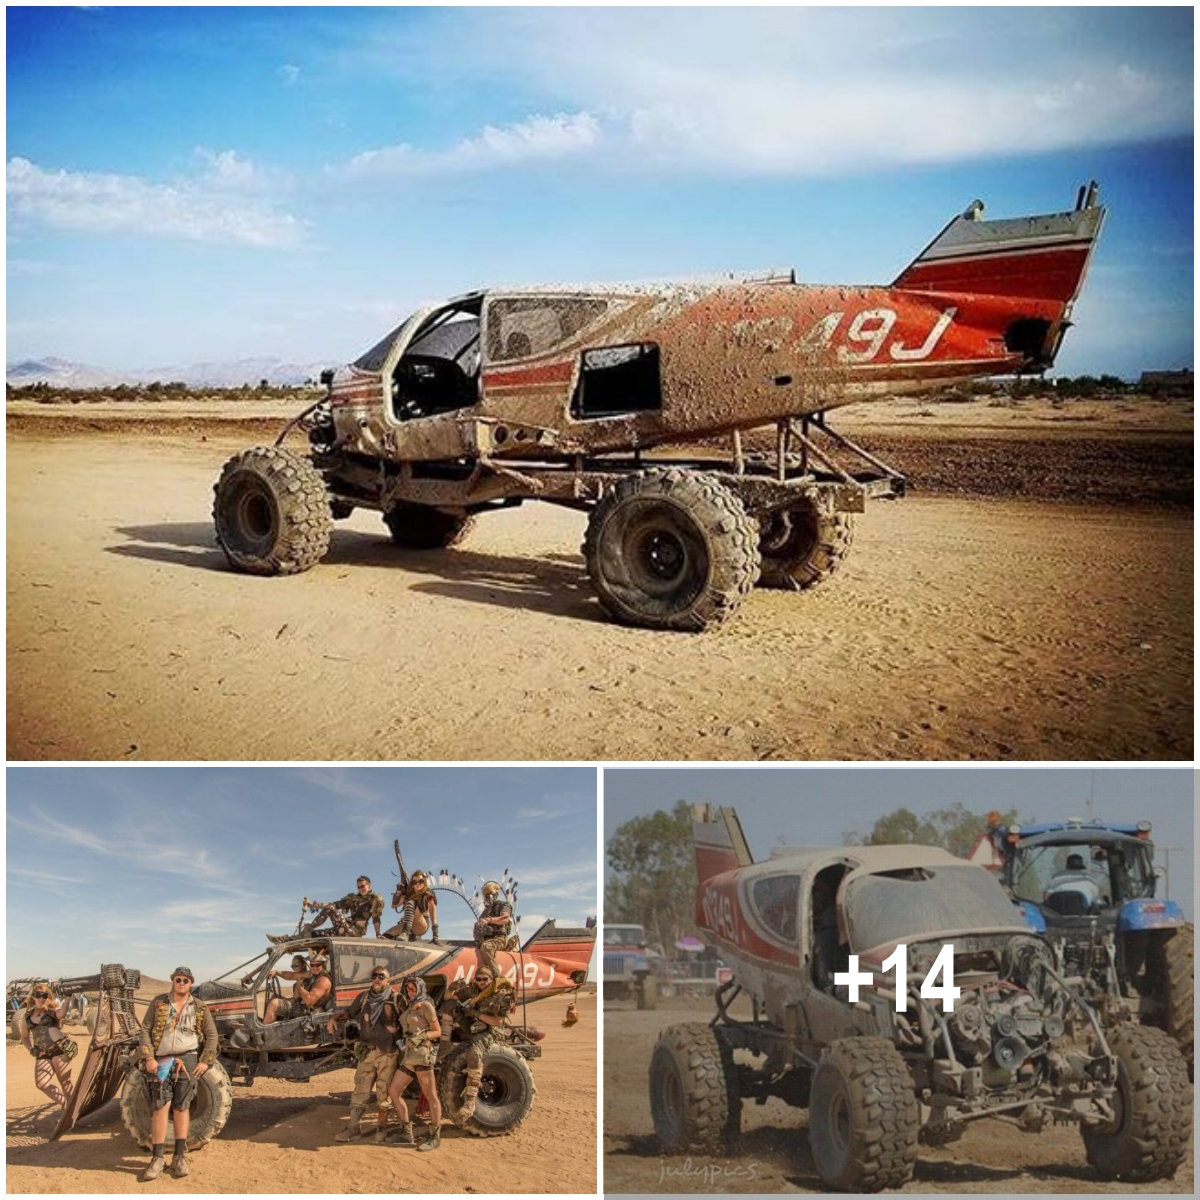 From Mad Max Inspired Plane to Monster Car Makeover